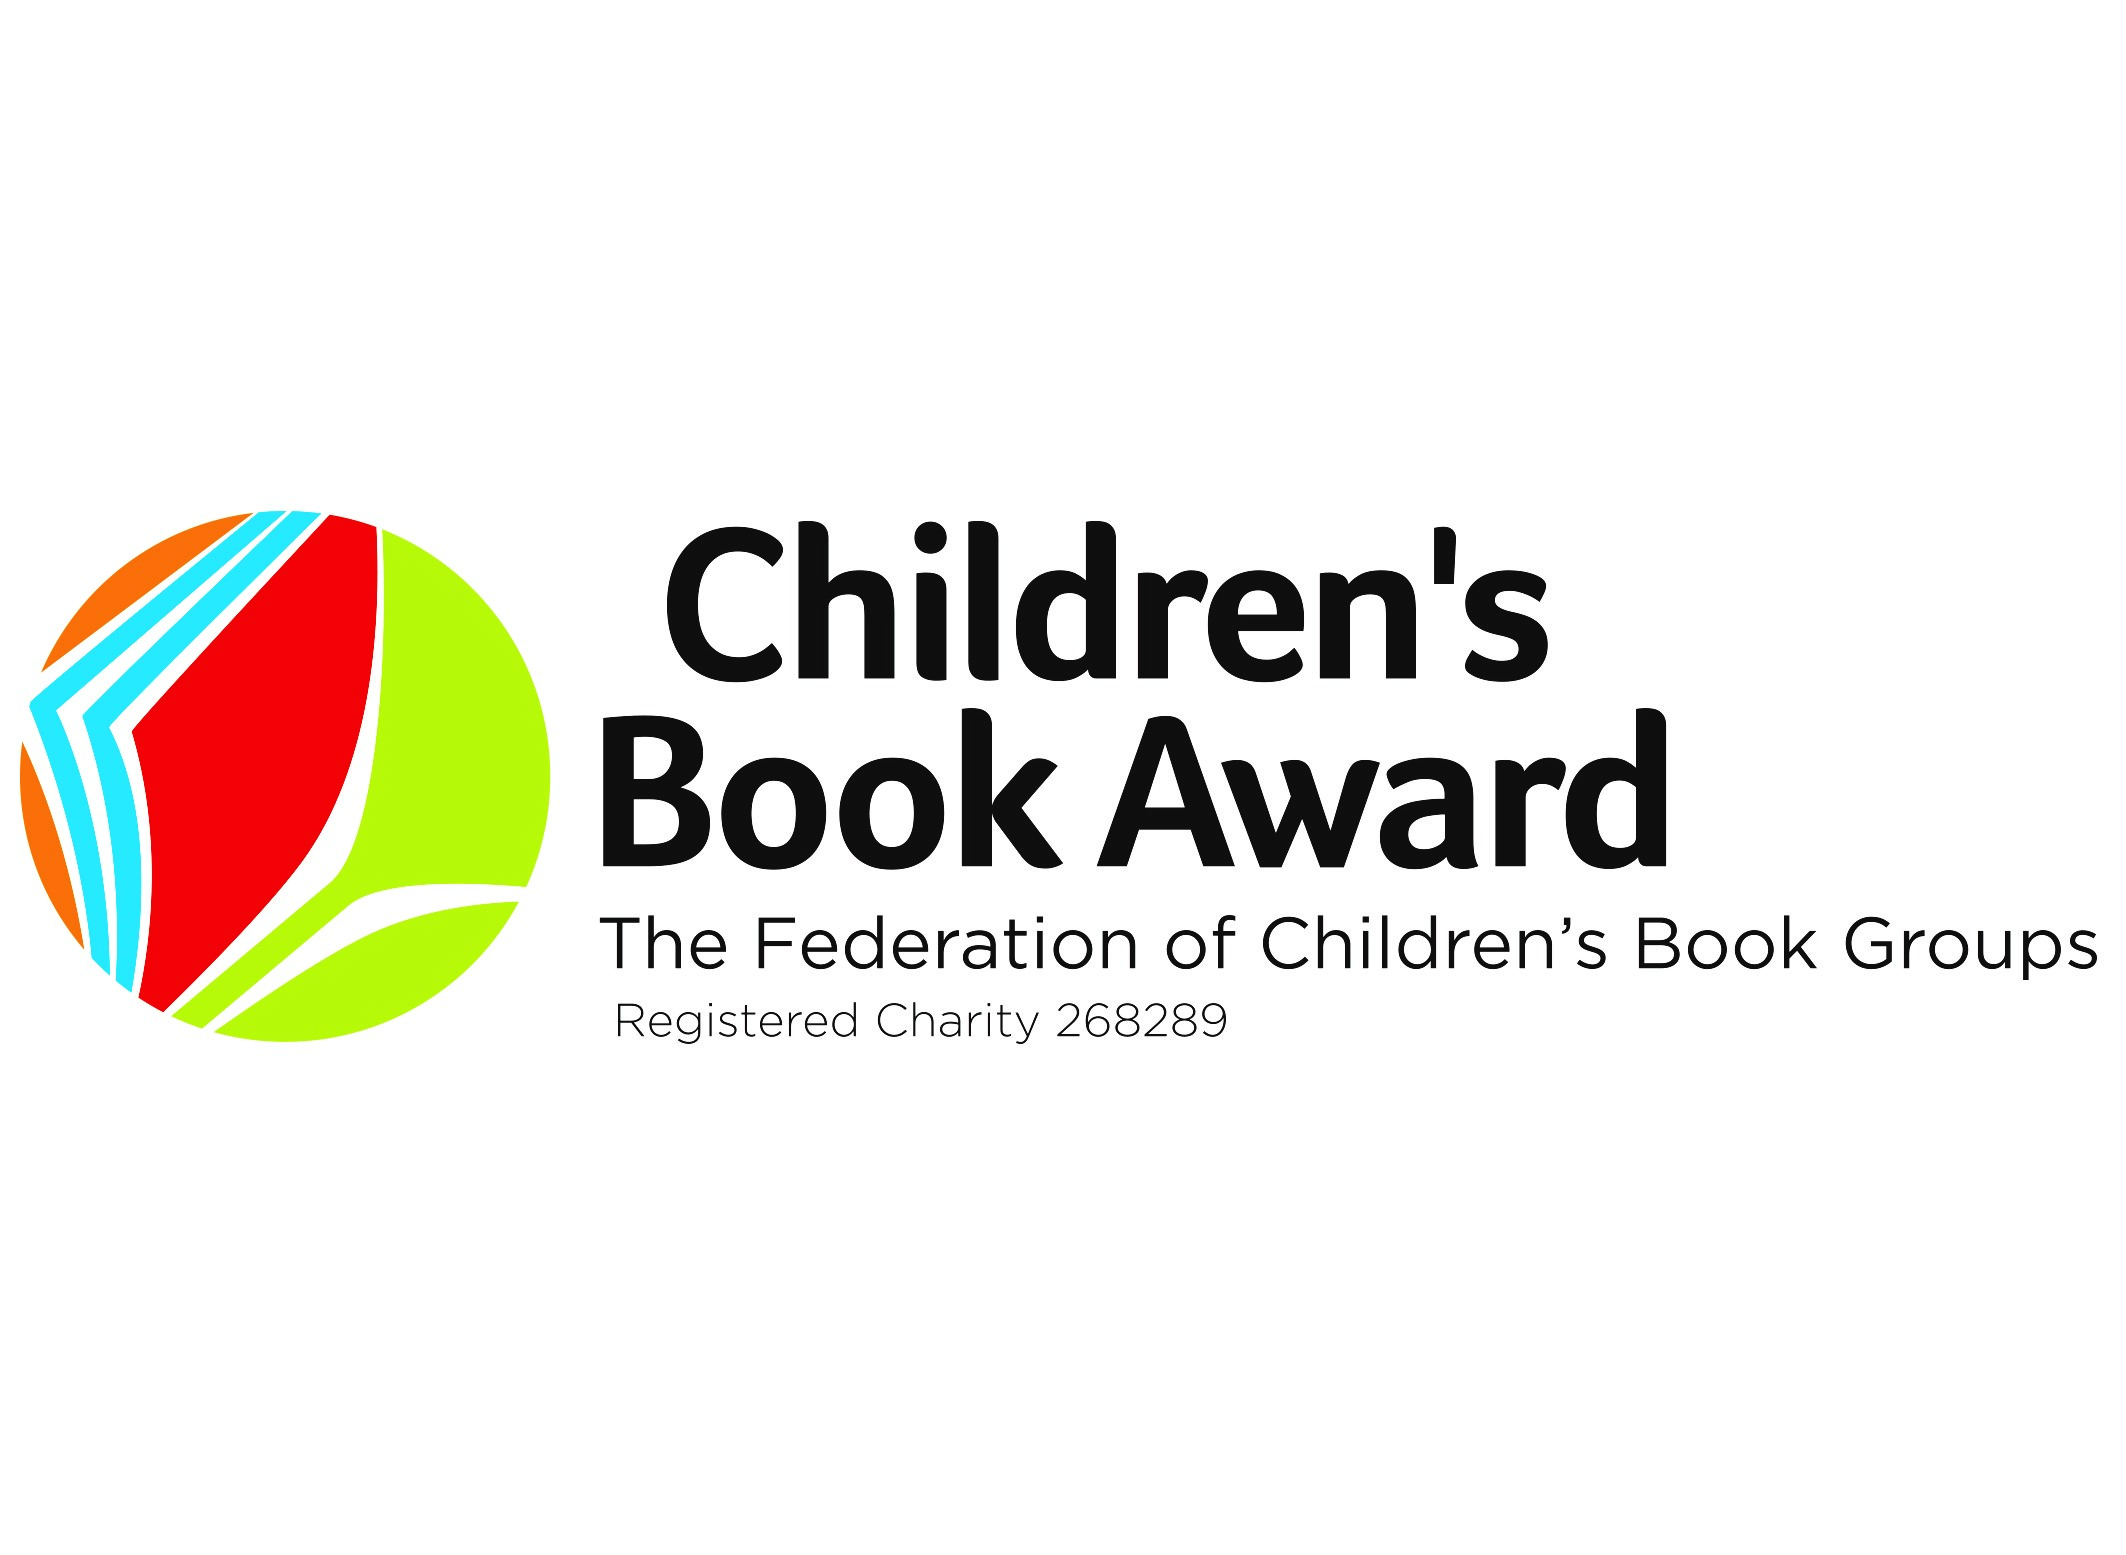 Peter Bently and Steven Lenton named winners of The Children’s Book